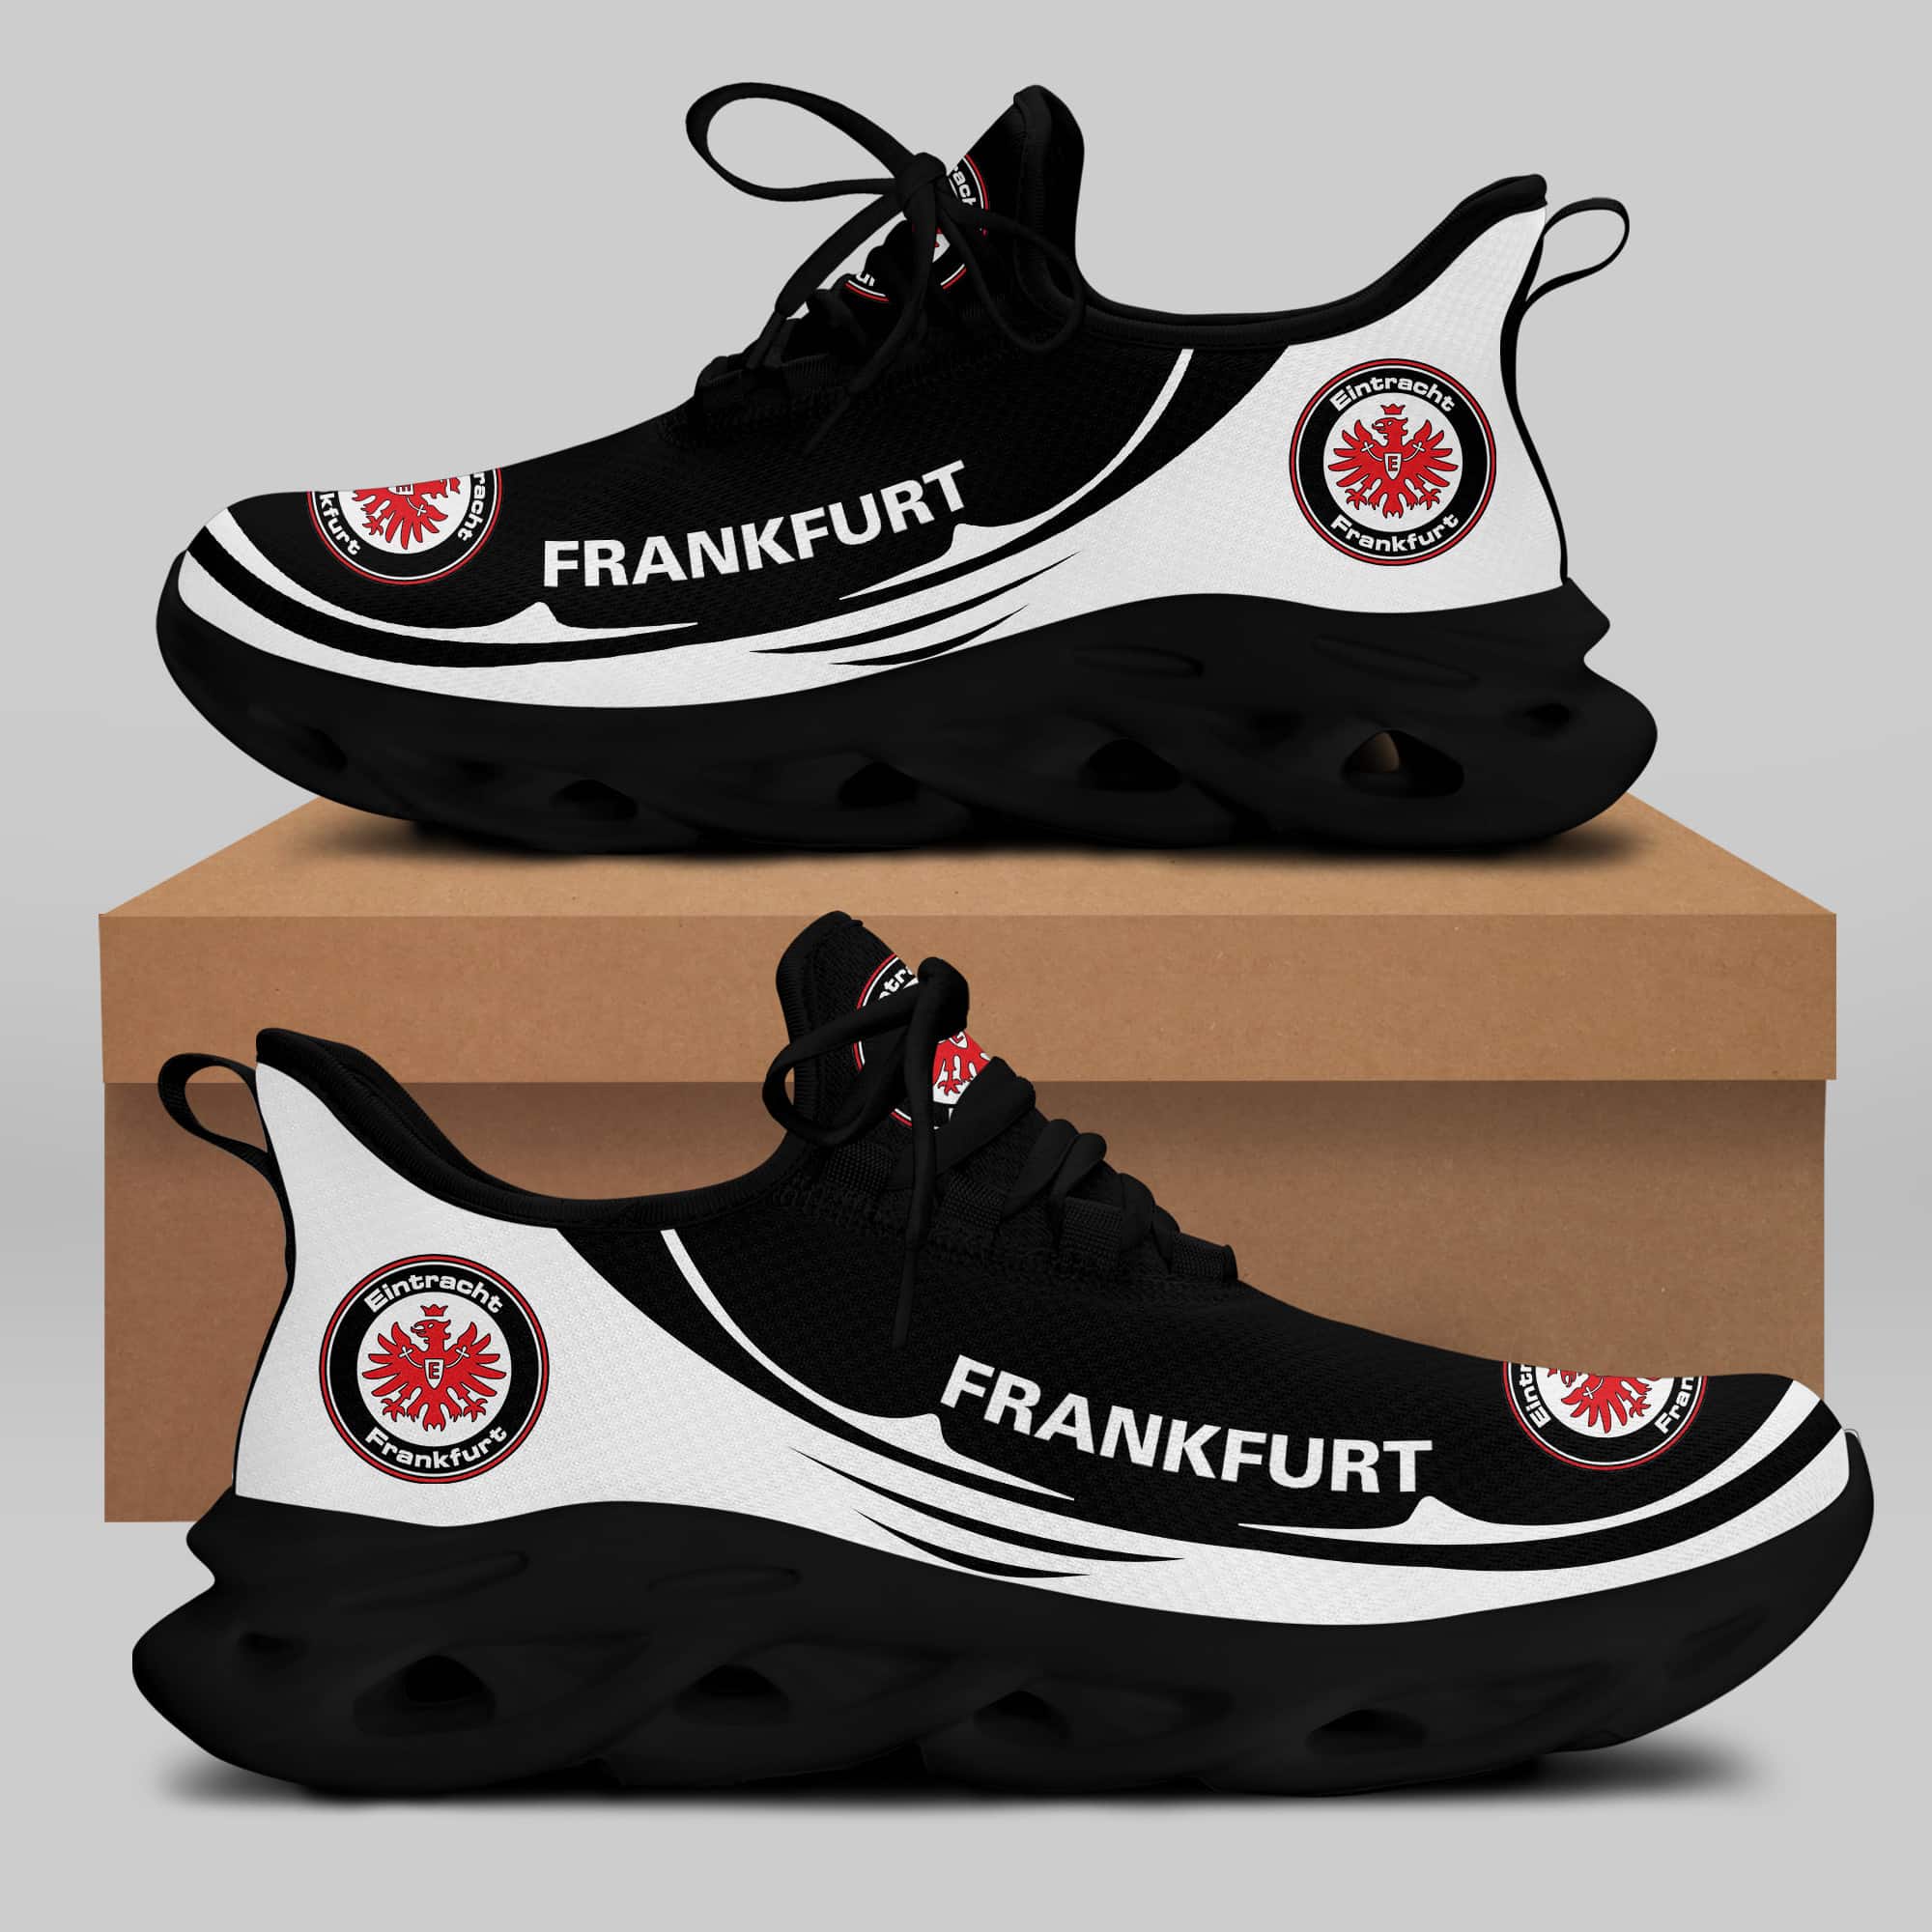 Eintracht Frankfurt Running Shoes Max Soul Shoes Sneakers Ver 21 2